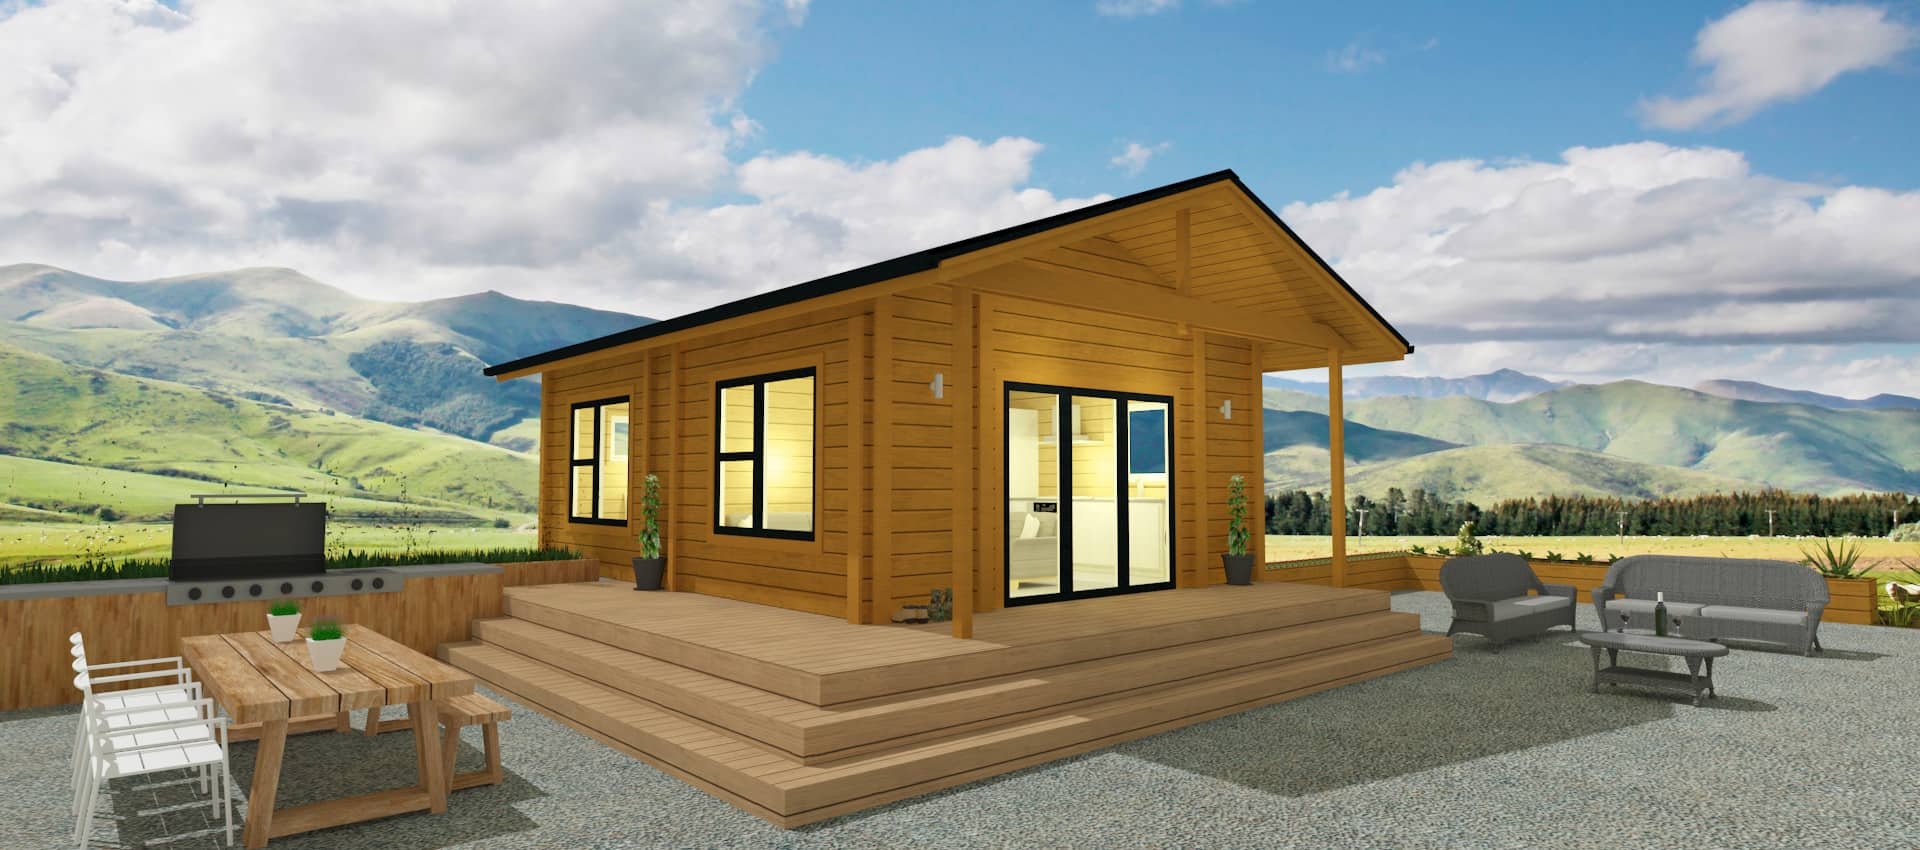 Eco Tiny Homes NZ, Sustainable Building - Little Owl